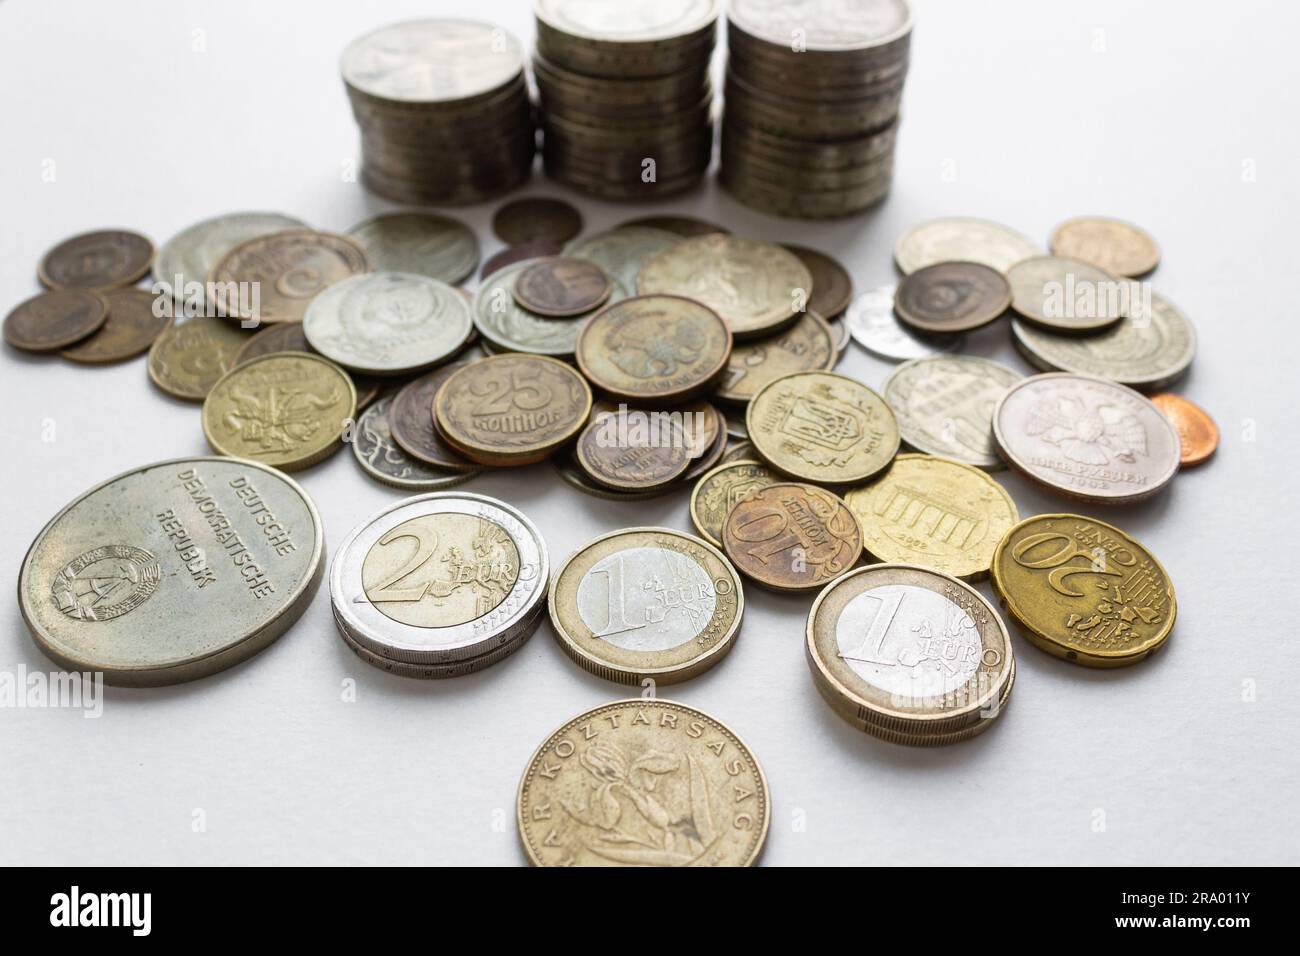 Collection of coins from different countries and times on a white background. Stock Photo